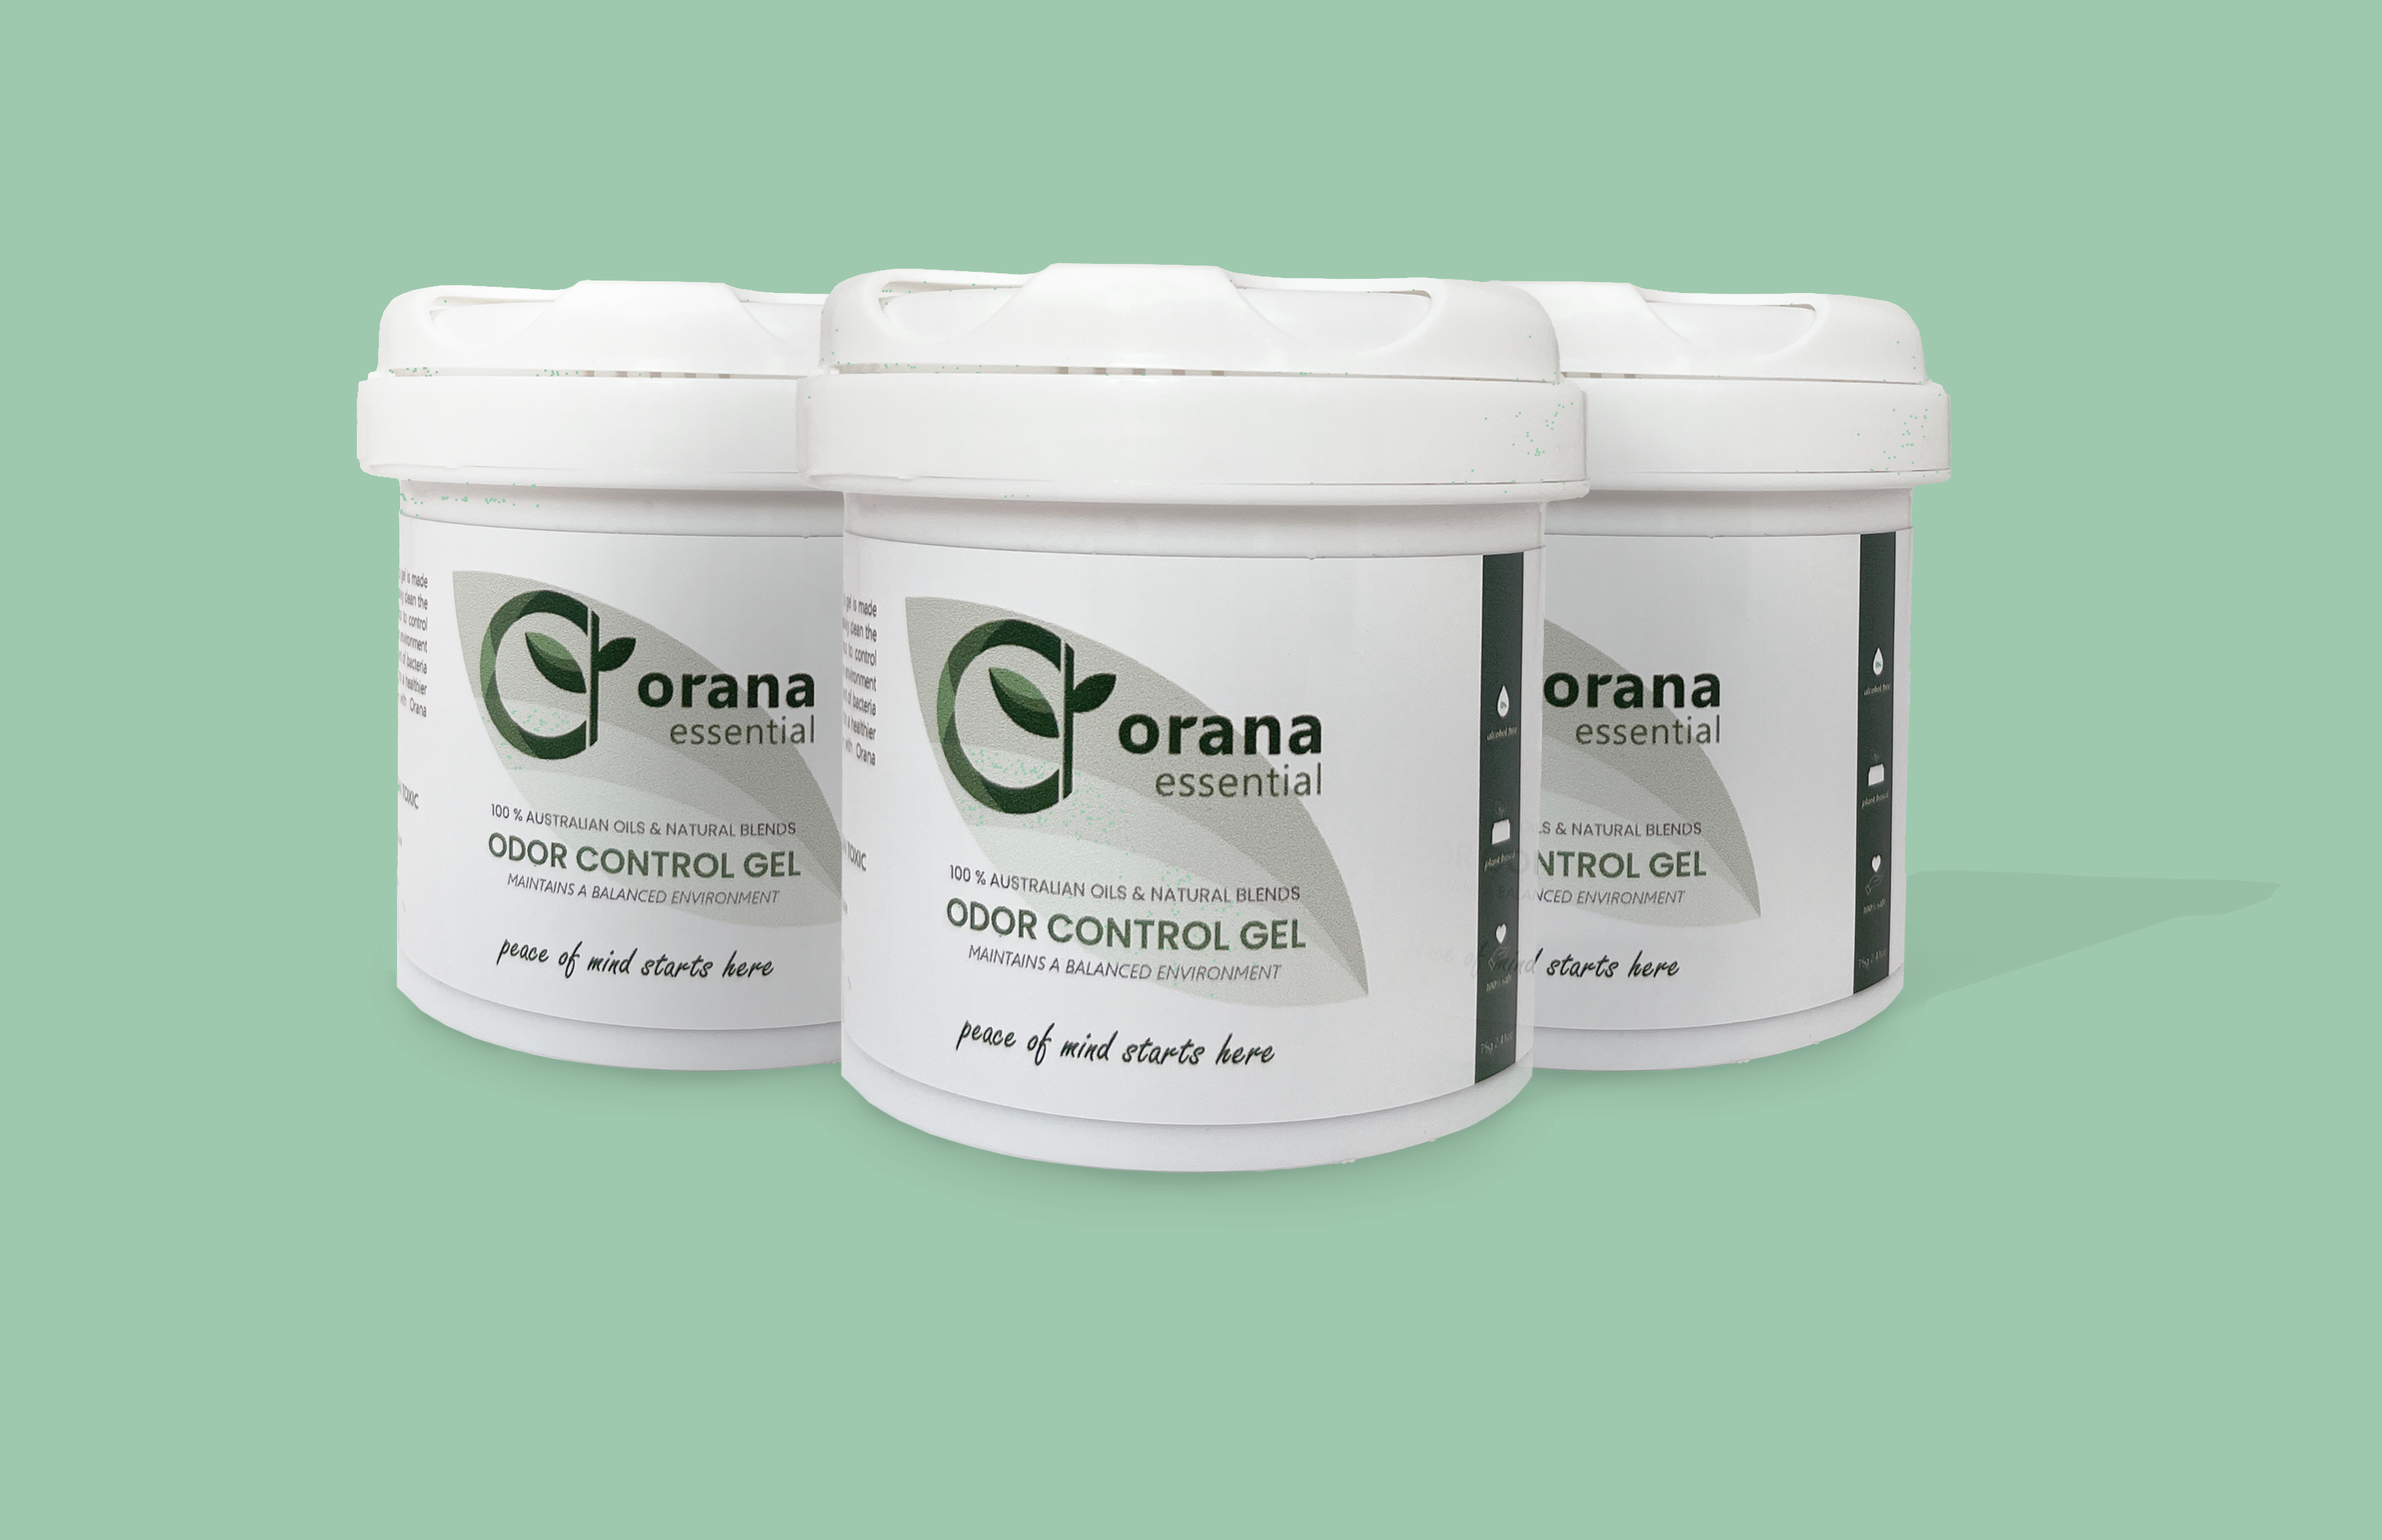 3 of the odor control gels - made to restore the indoor air quality.